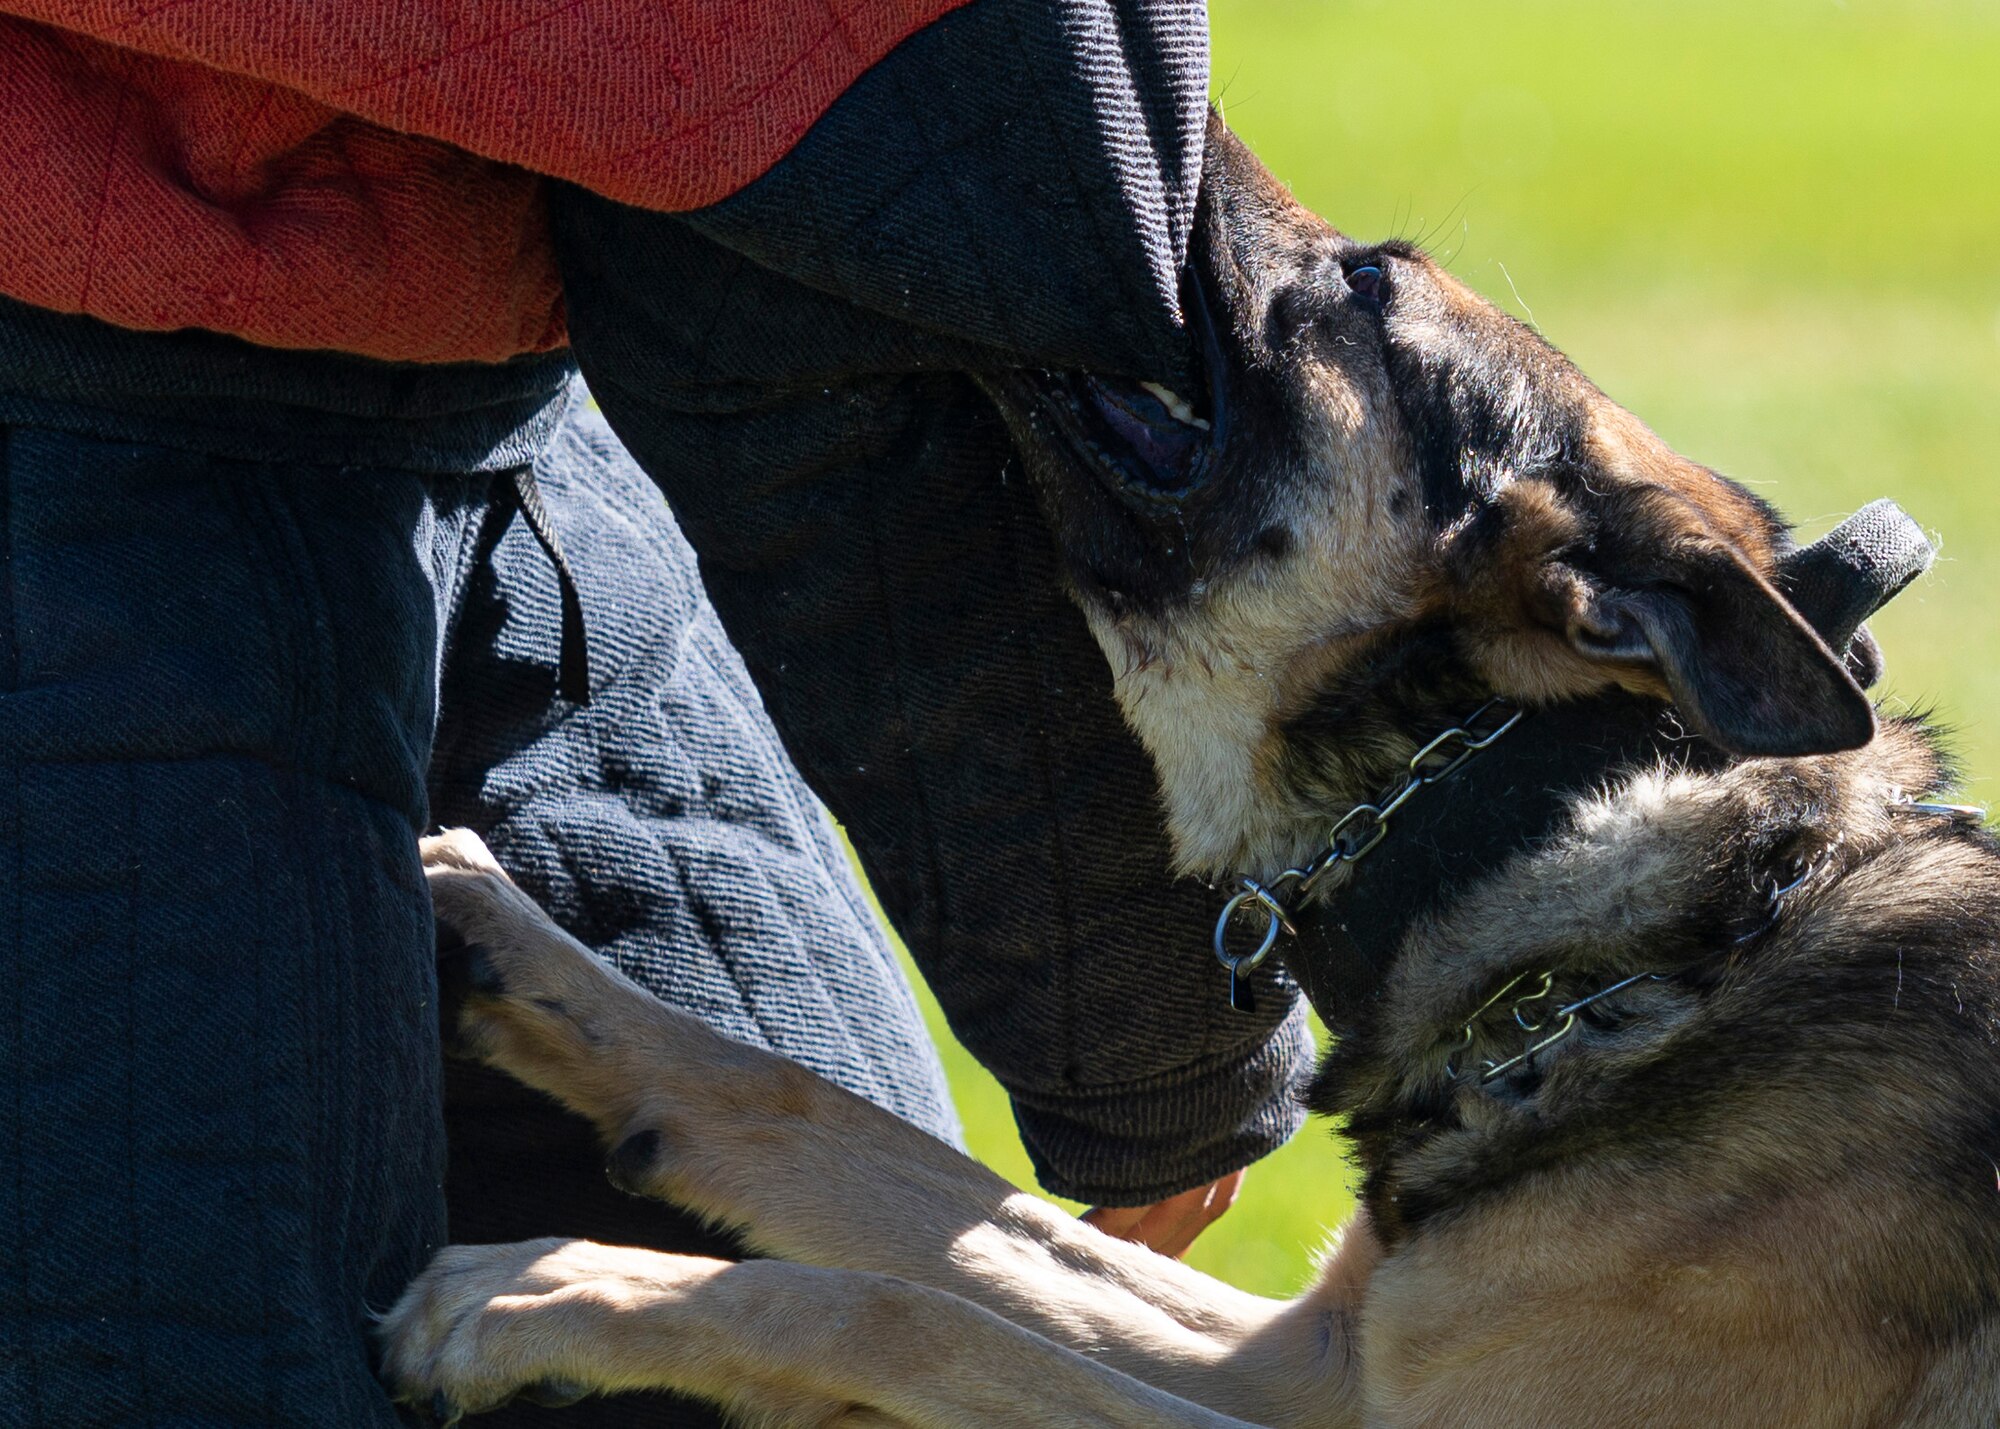 Arco, a Meridian Police Department K-9, bites a decoy in a bitesuit.